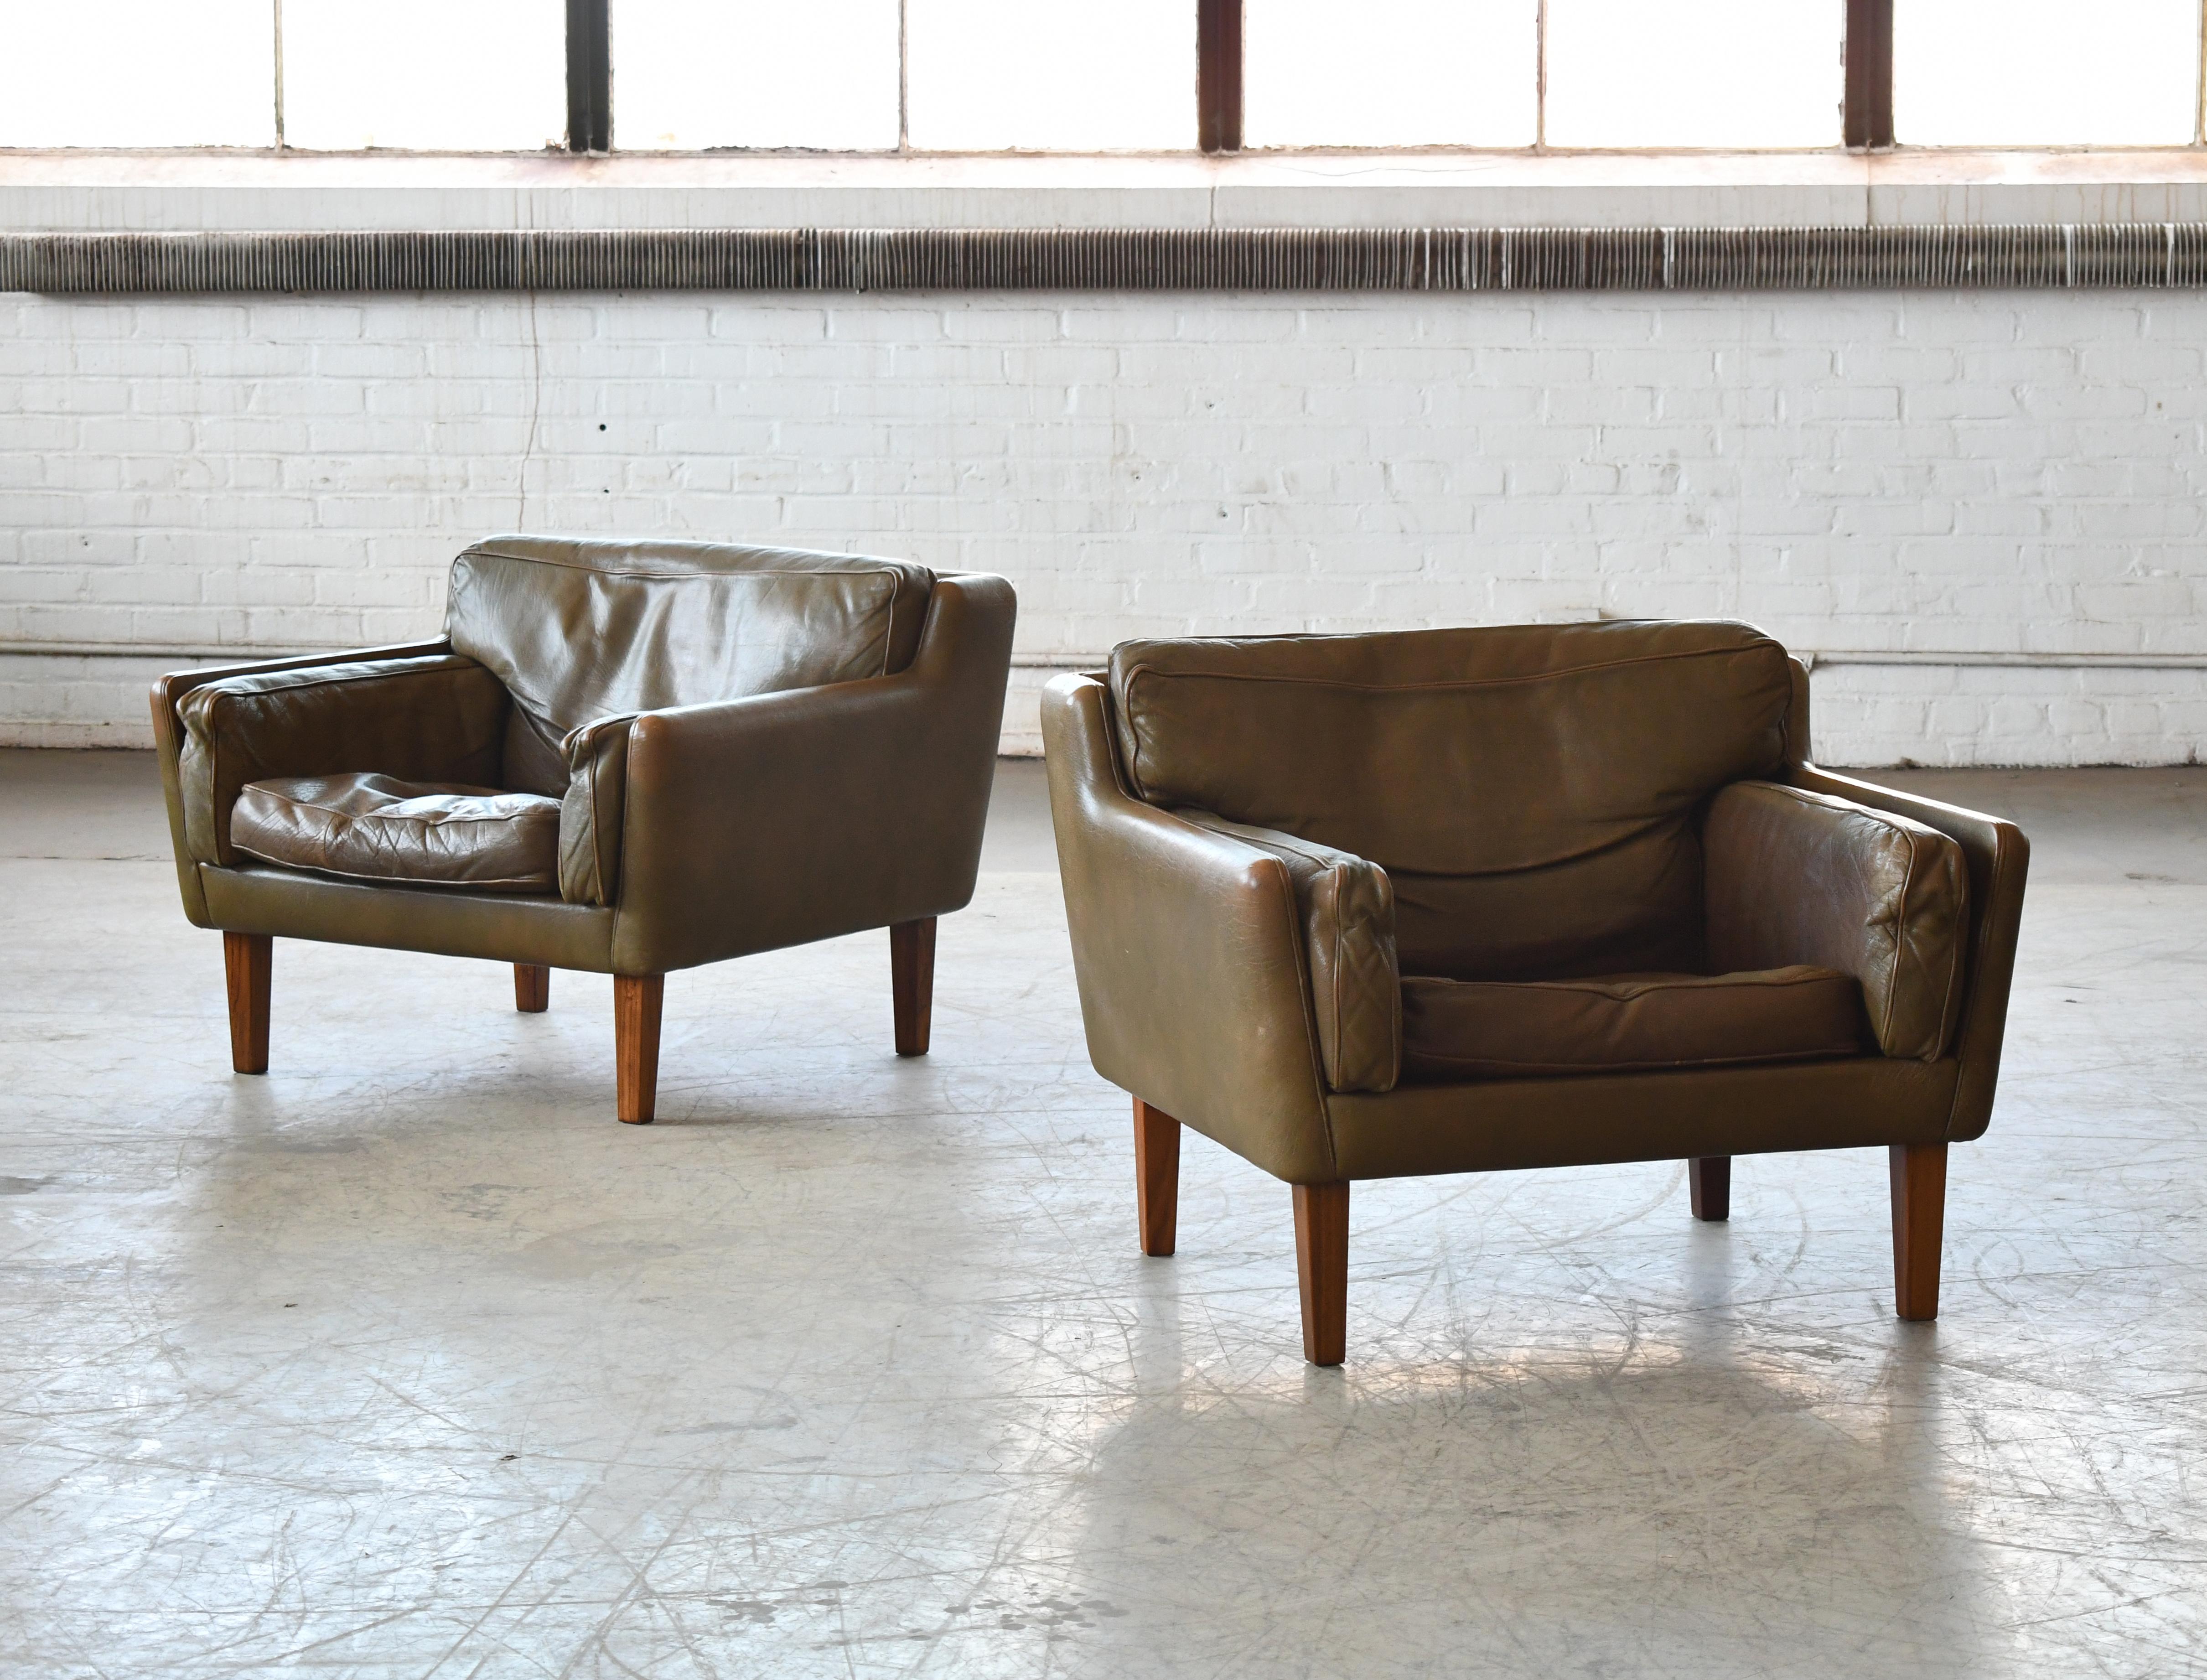 Pair of 1960's Olive Brown Leather Lounge Chairs with Ottoman by Illum Wikkelsø 1